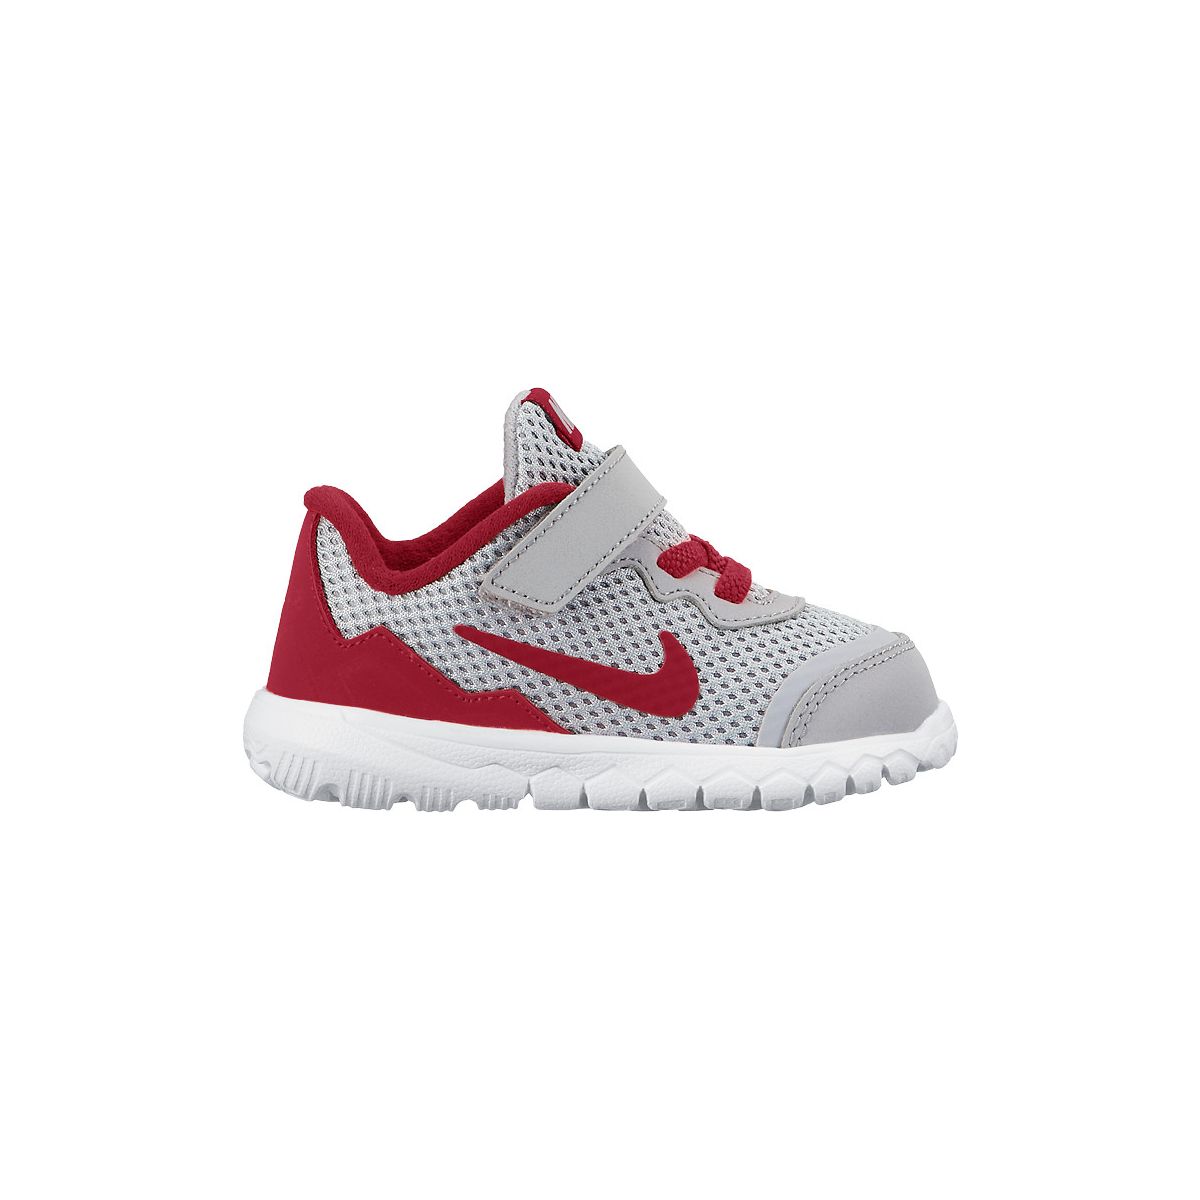 Nike Flex Experience 4 (TD) Toddler Boys' Shoes 74981